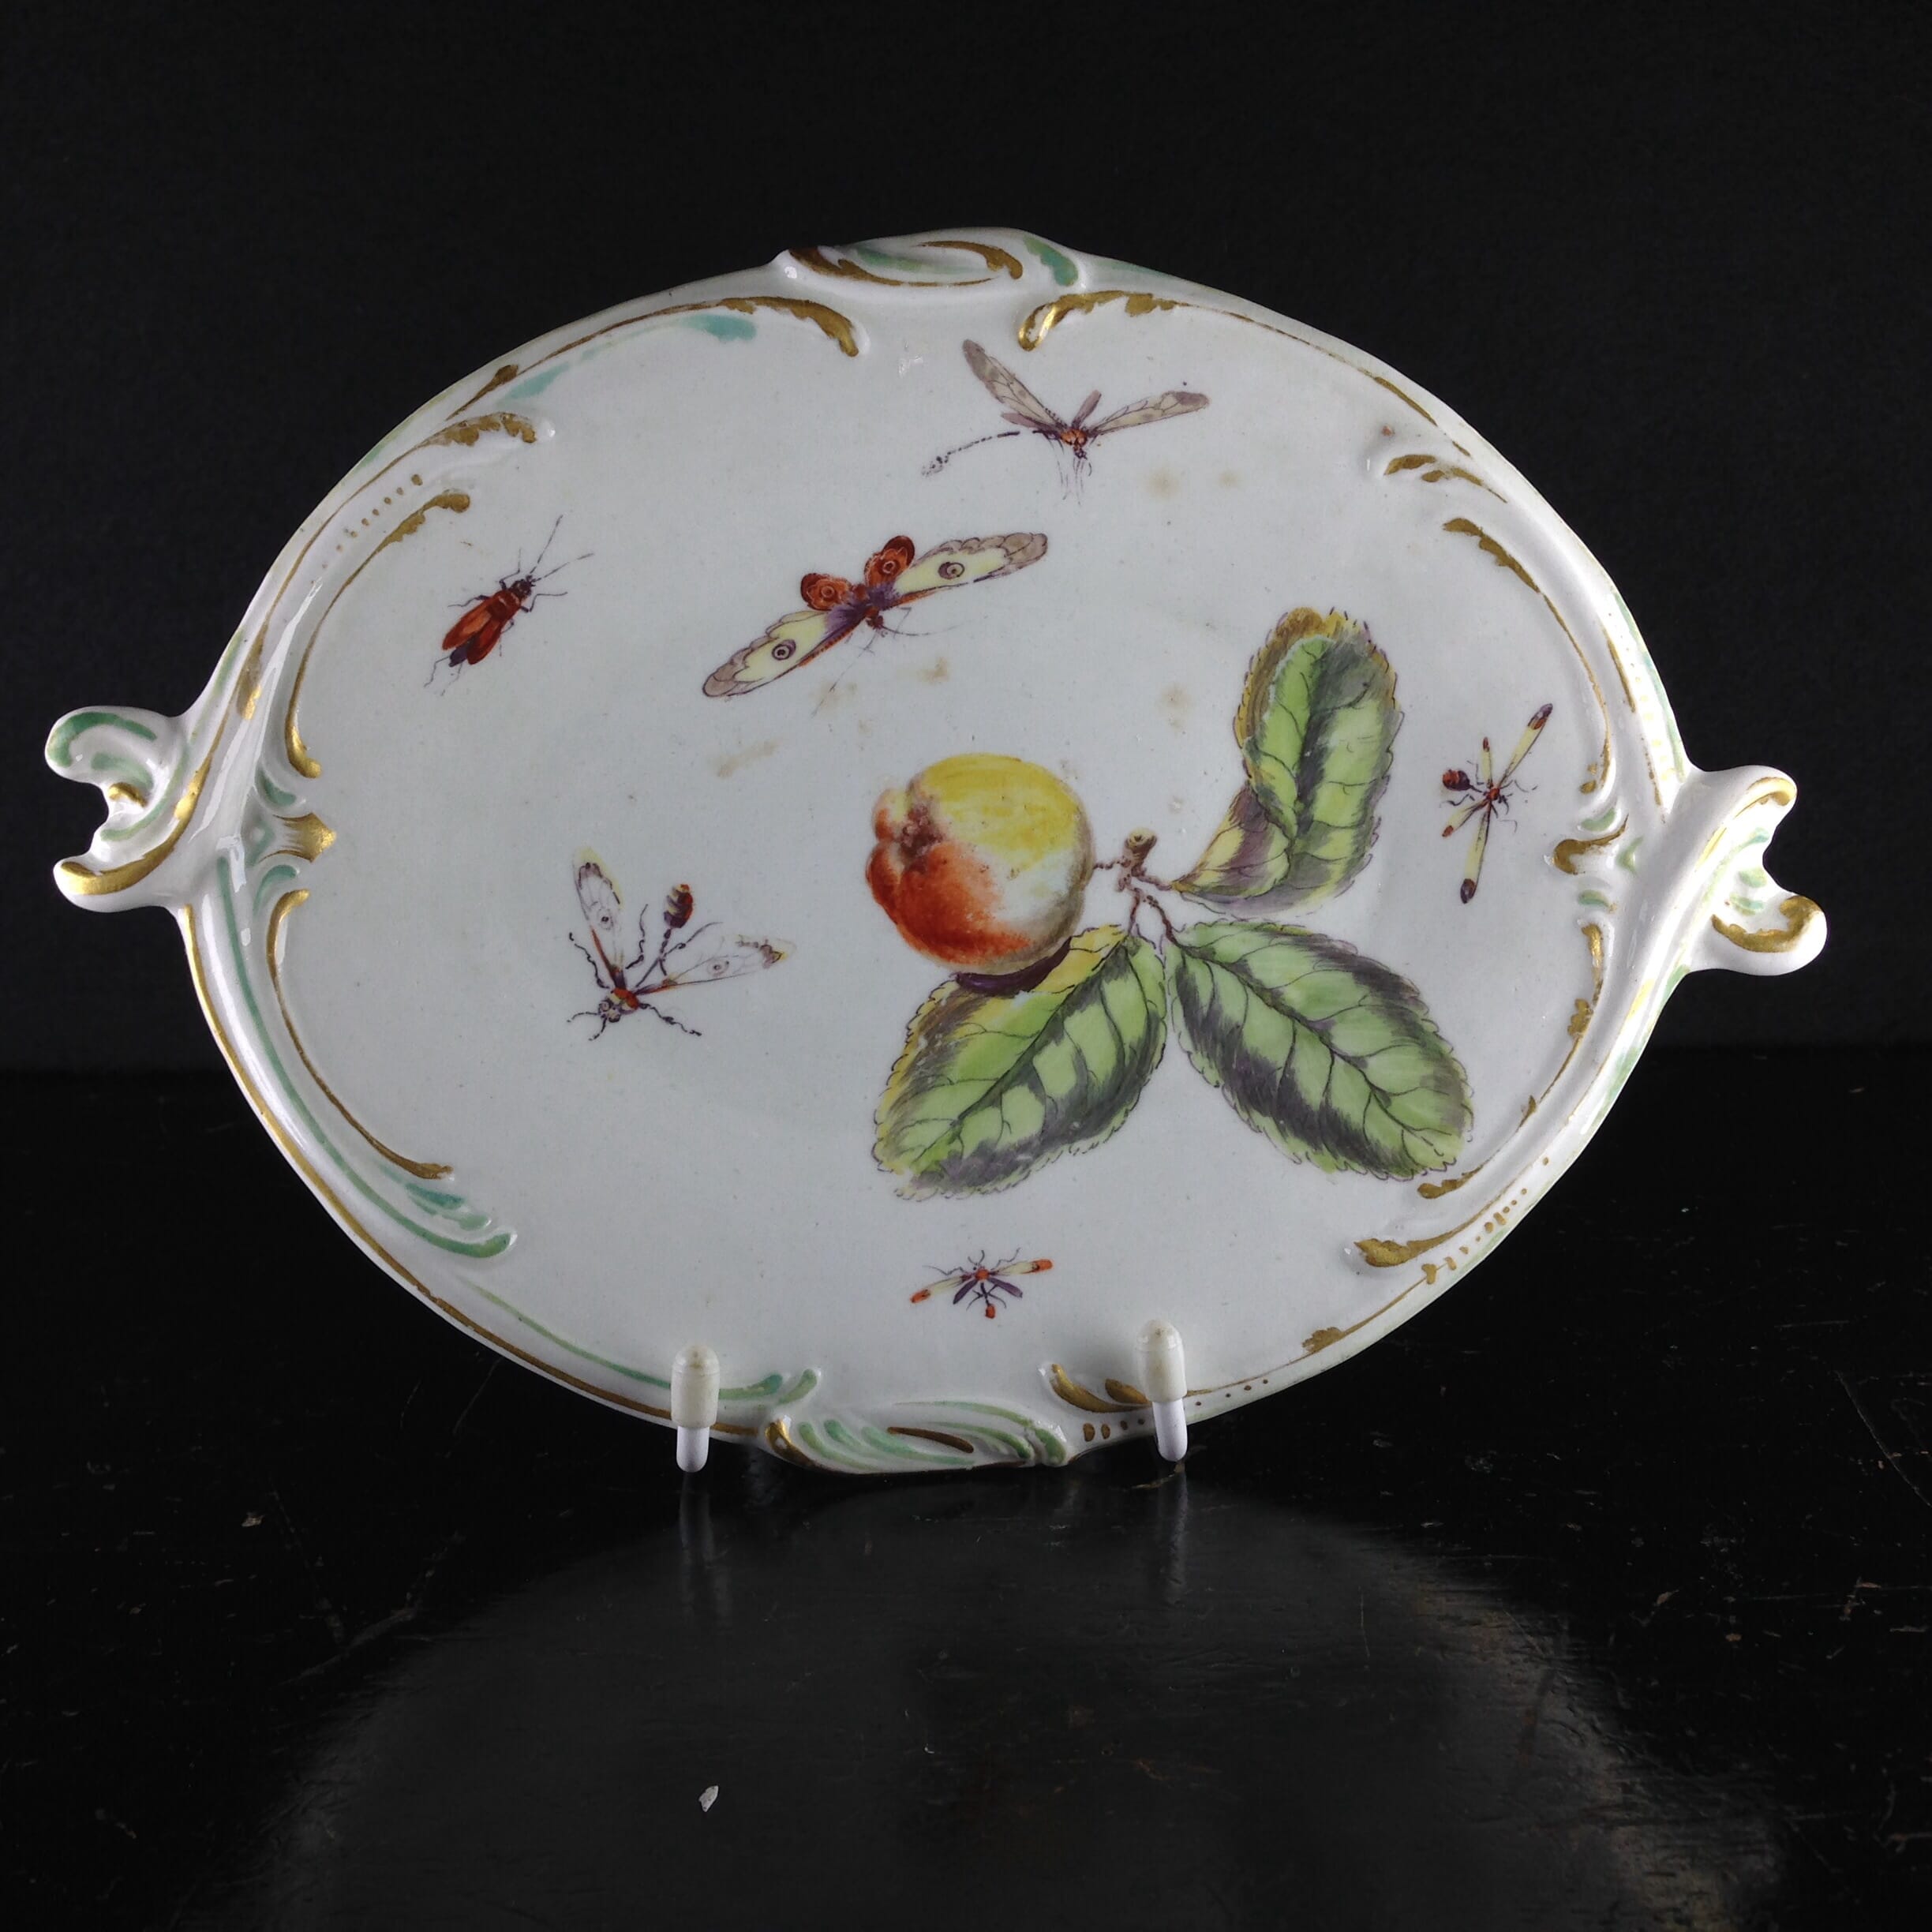 Derby dish with apple & bugs, C. 1765 -0